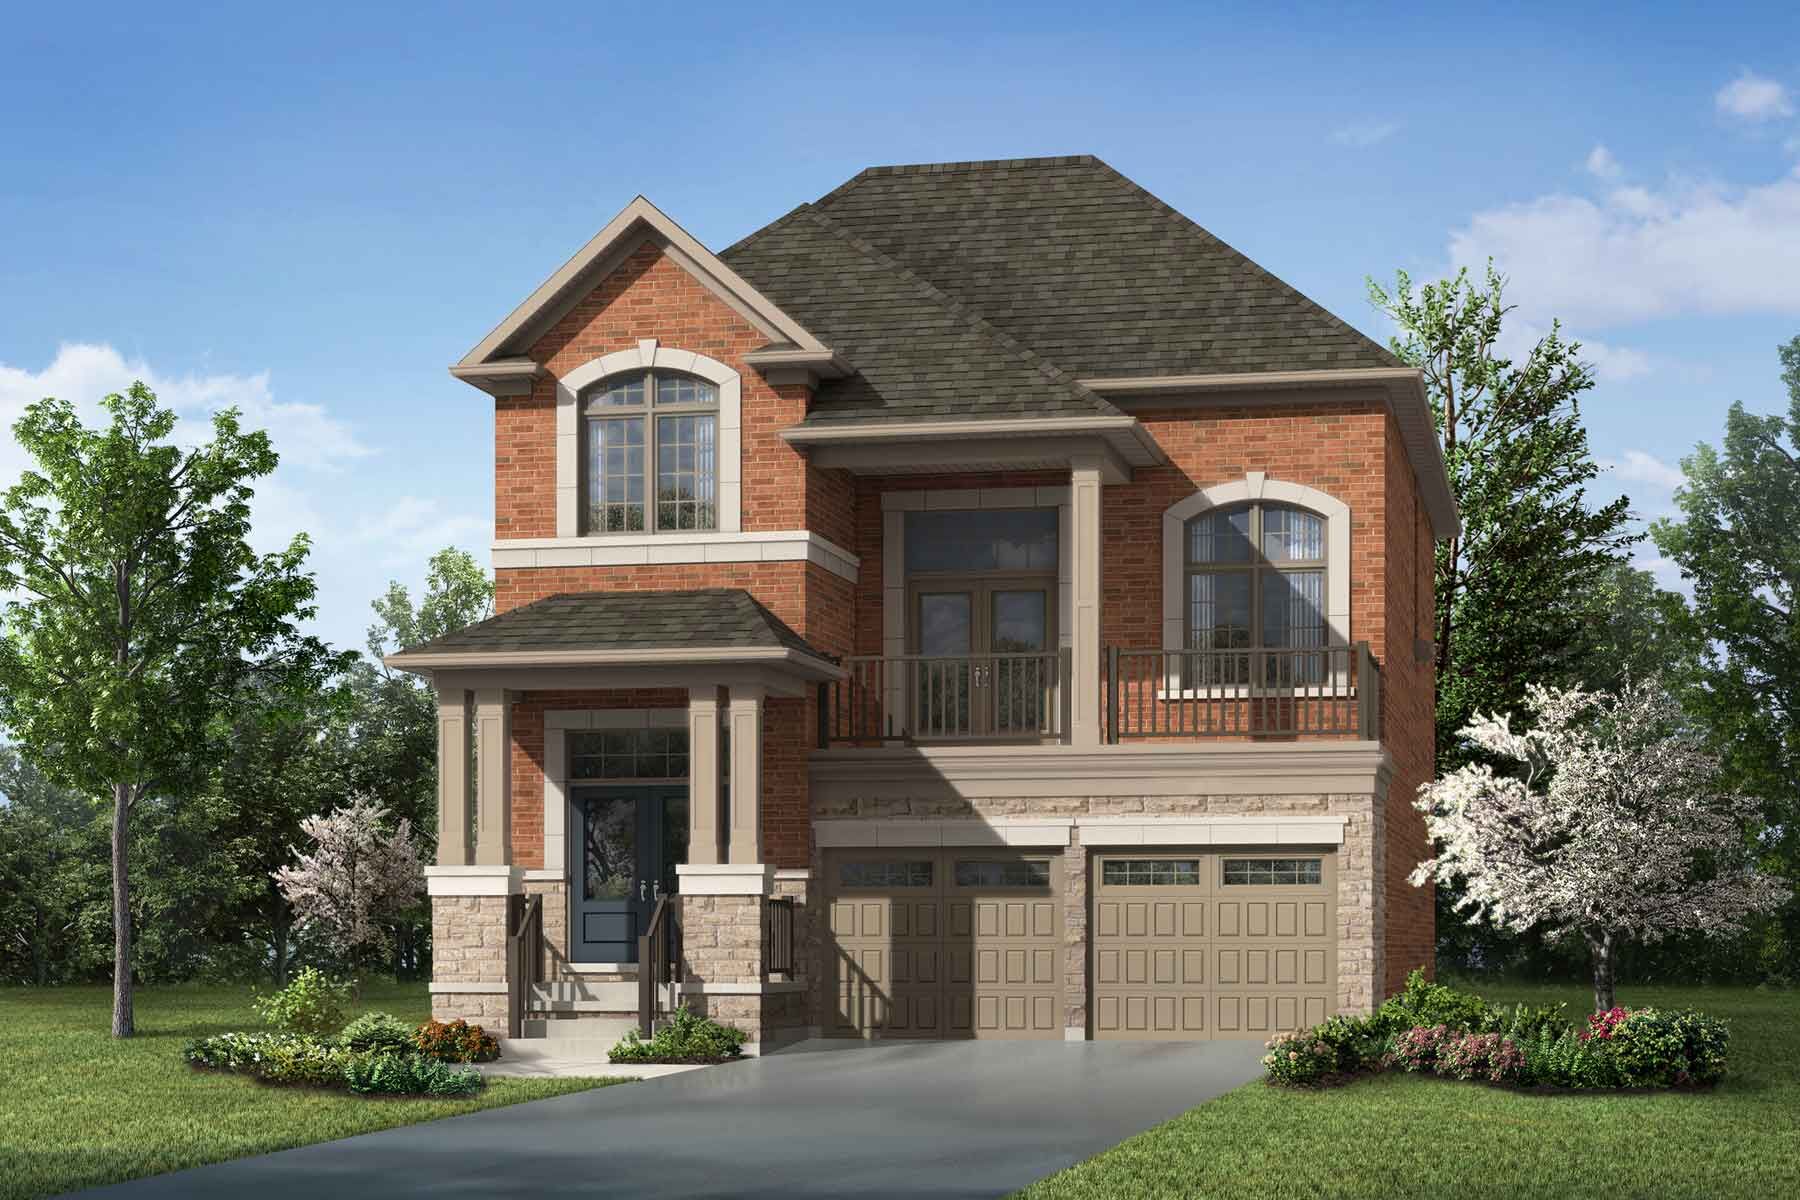 A Traditional style single family home with a double car garage.